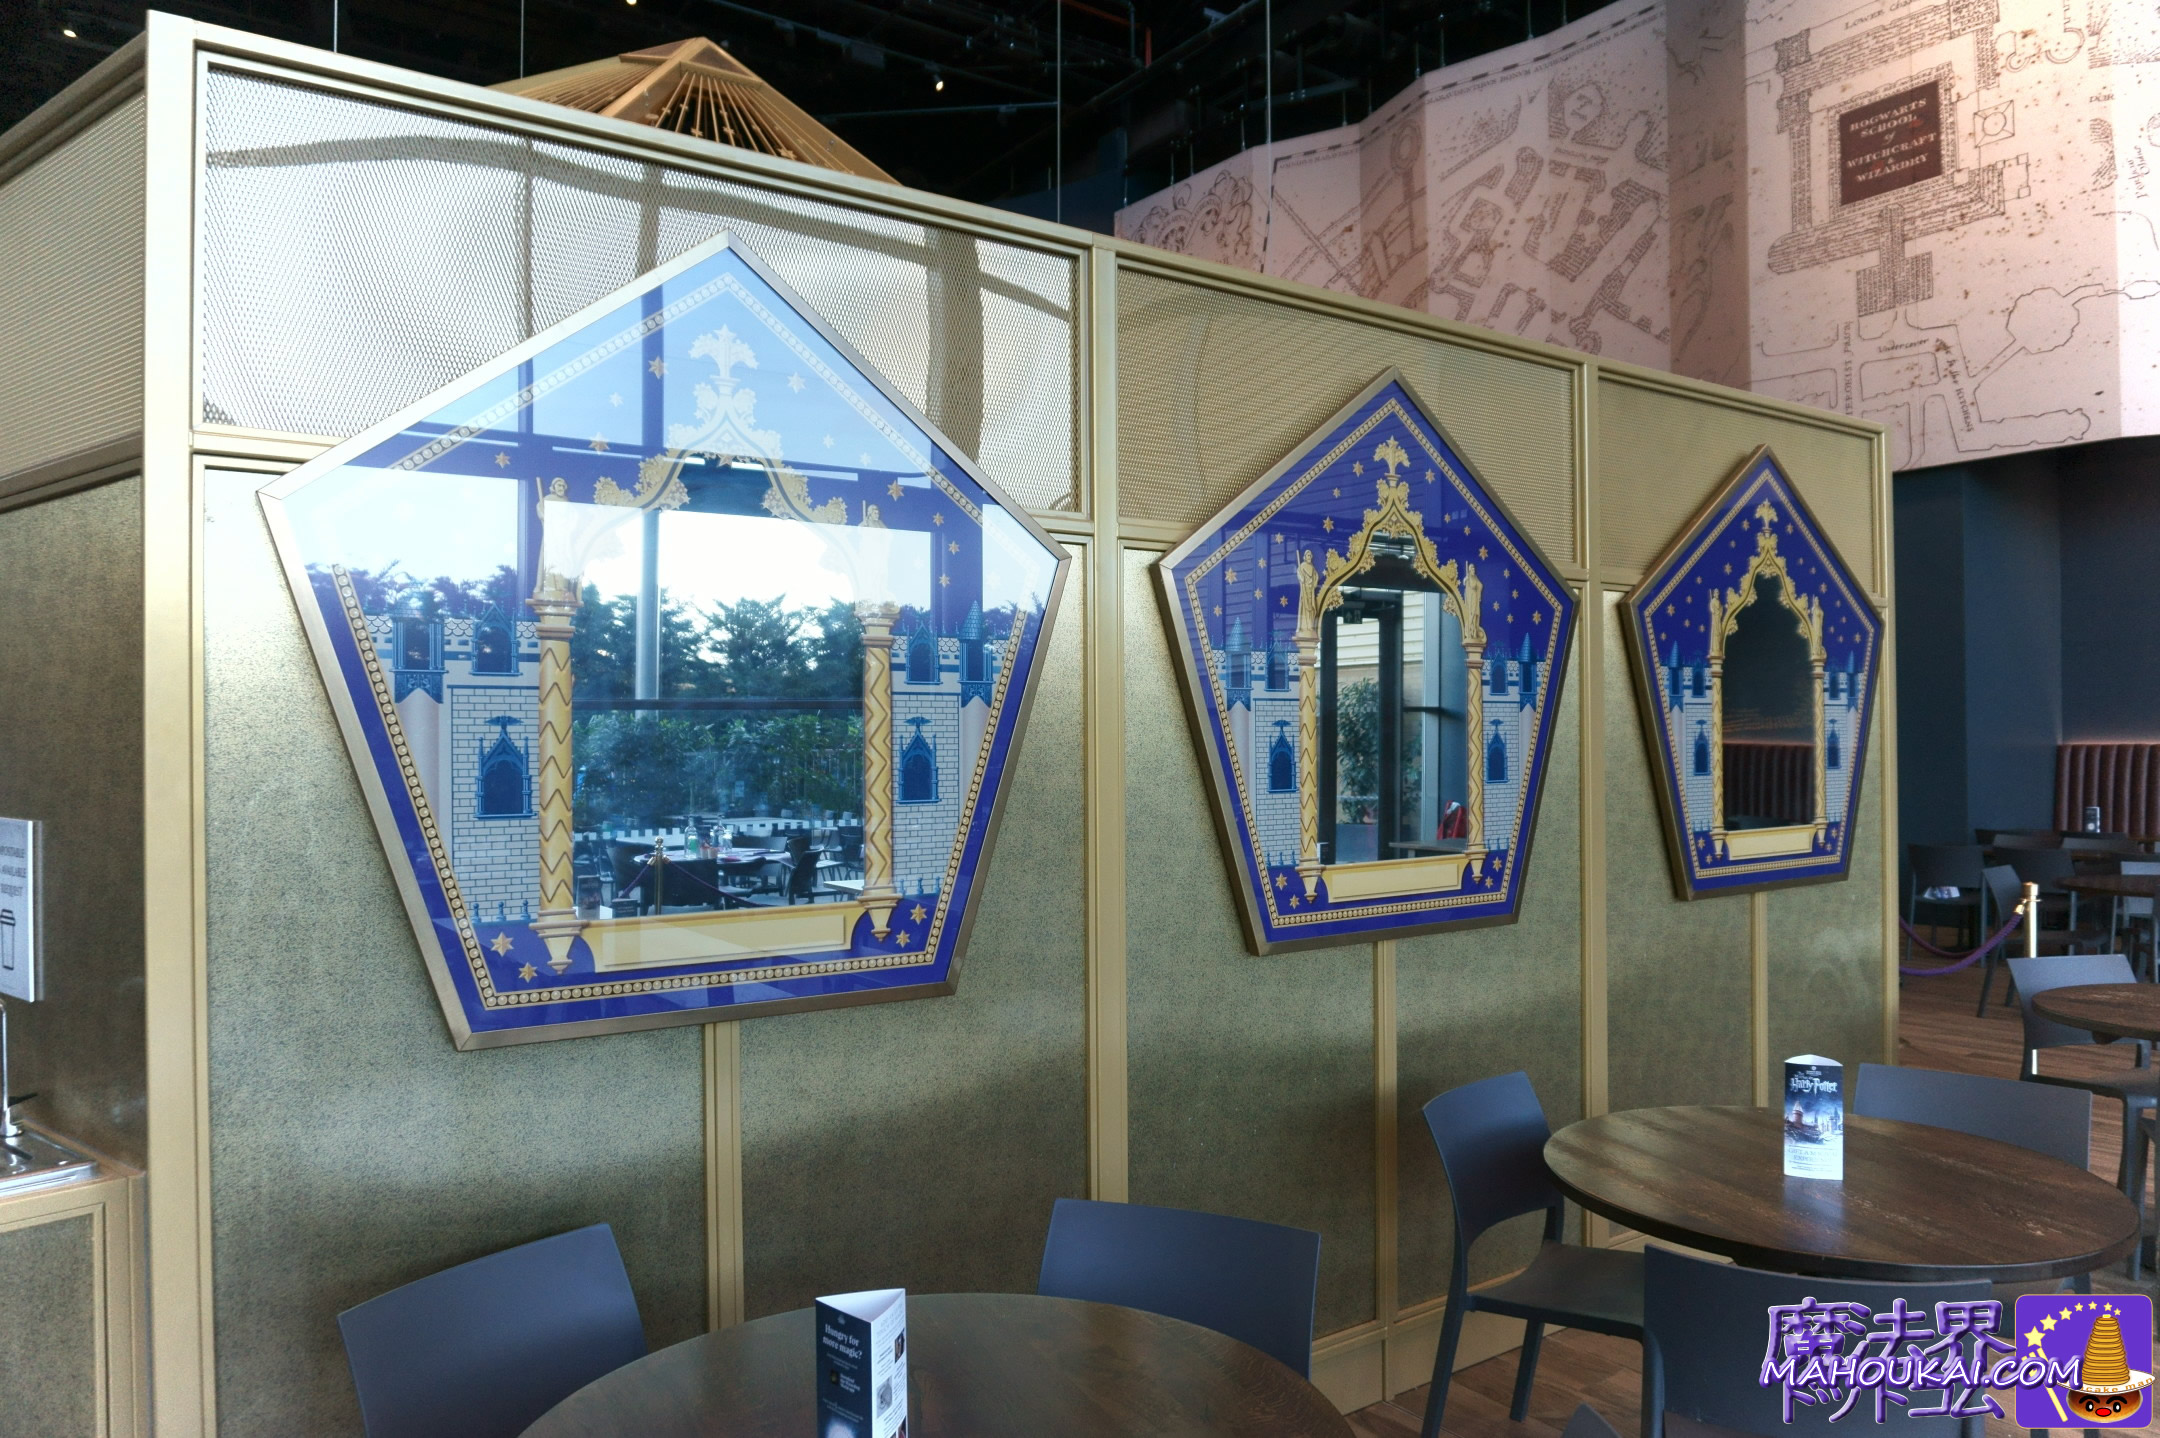 HIDDEN SPOT: Mirror that can become a wizard's great man card THE CHOCOLATE FROG CAFE  Frog Chocolate Cafe Harry Potter Studio Tour London